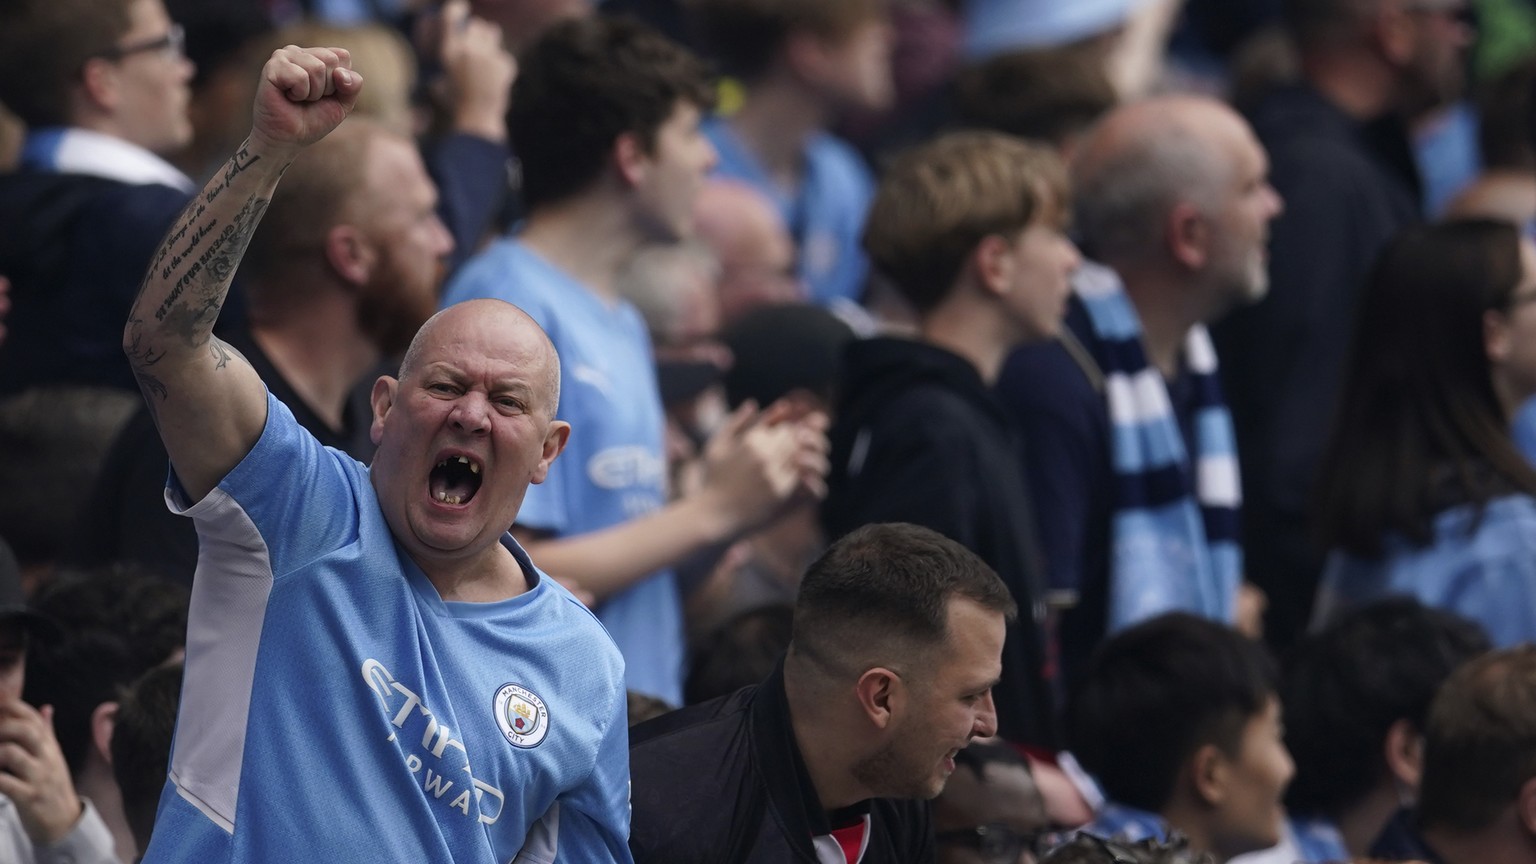 Manchester City fans shouts during the English Premier League soccer match between Manchester City and Aston Villa at the Etihad Stadium in Manchester, England, Sunday, May 22, 2022. (AP Photo/Dave Th ...